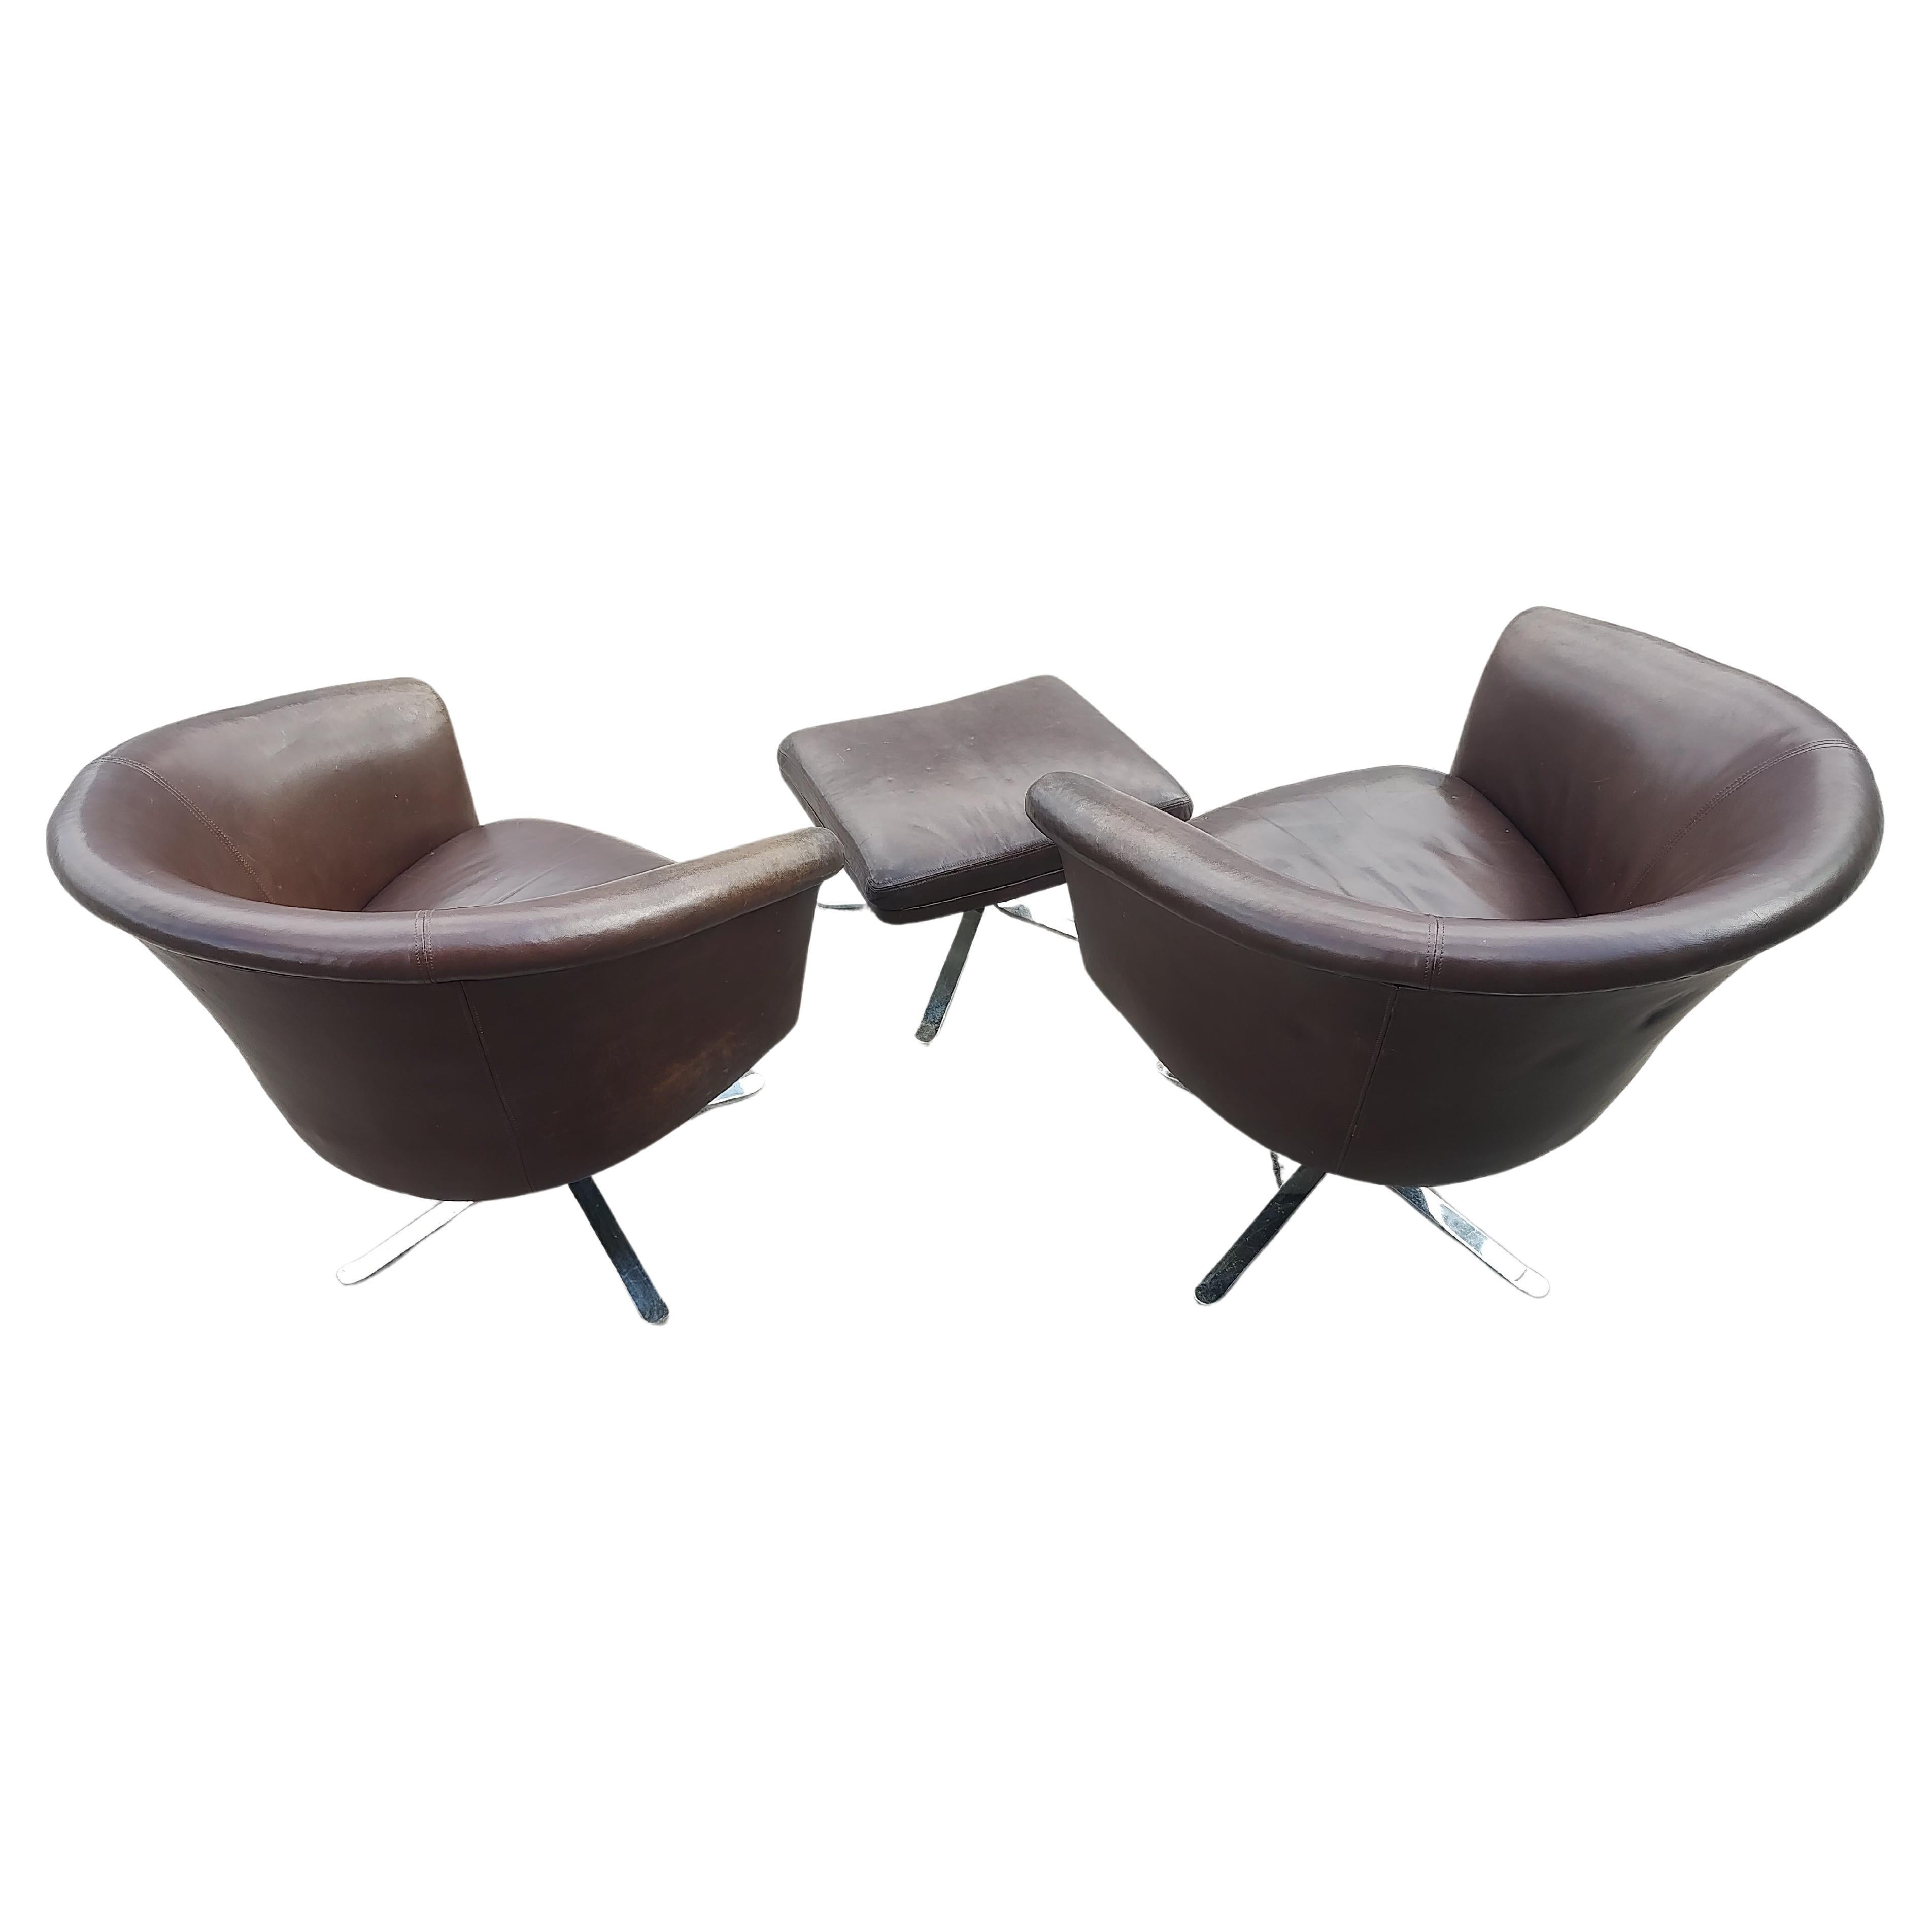 Mid-20th Century Pair of Mid Century Modern Leather Swiveling Lounge Chairs with an Ottoman C1965 For Sale